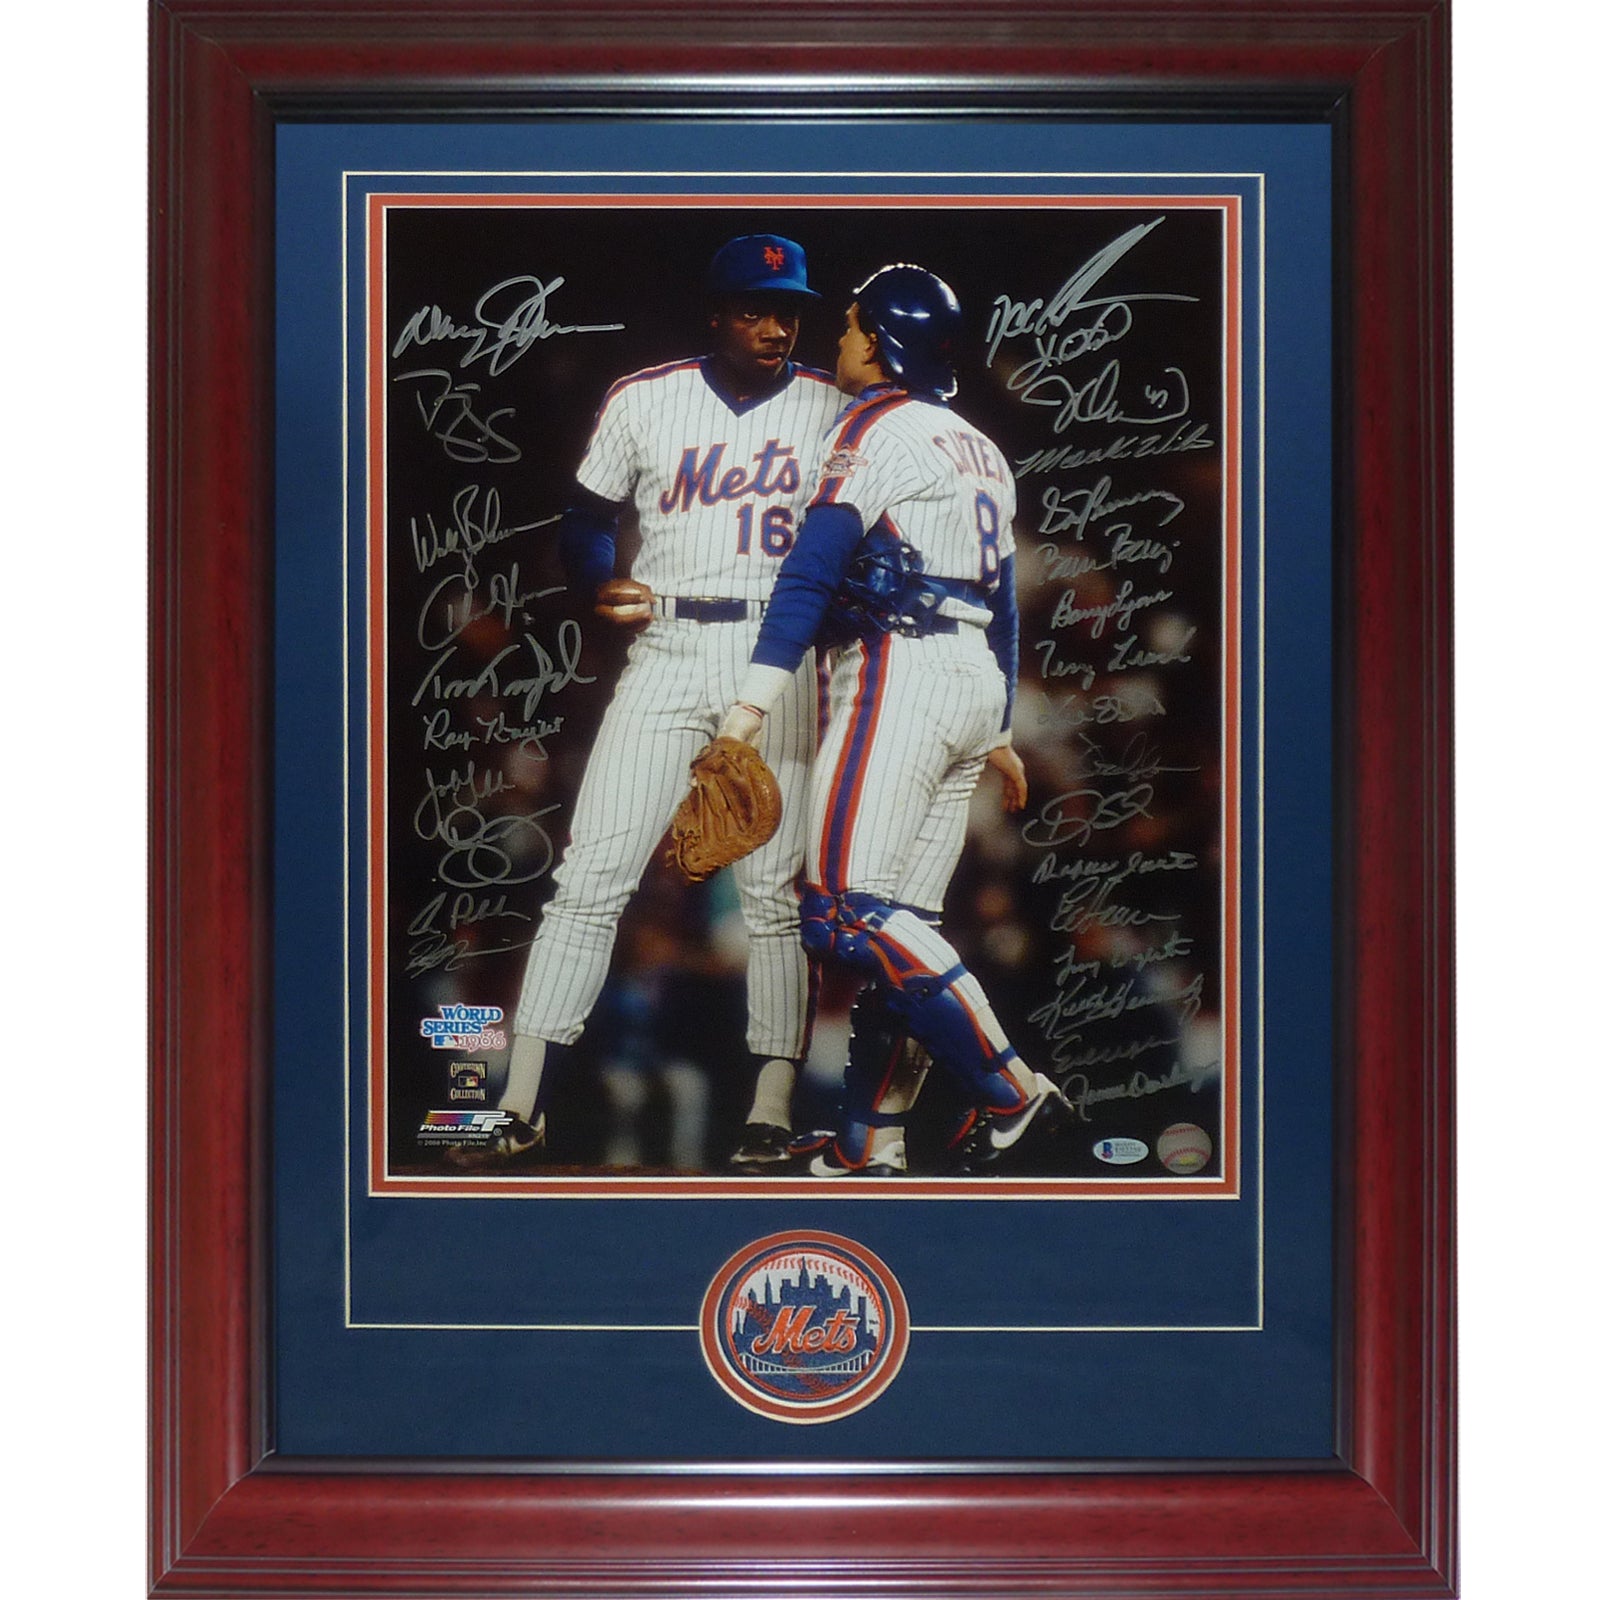 George Foster, New York Mets, Signed 8x10 Photograph